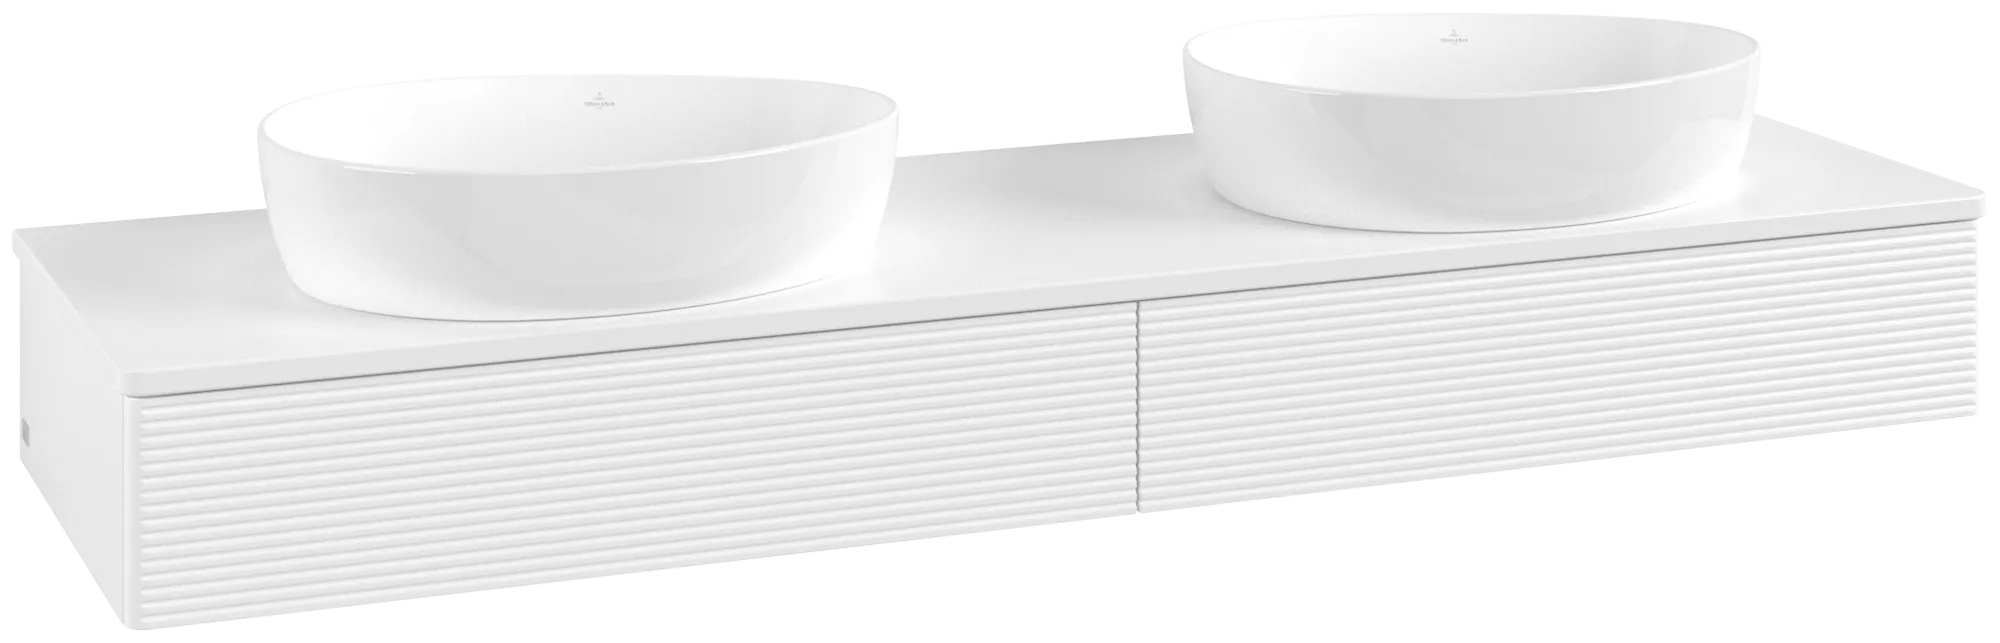 VILLEROY BOCH Antao Vanity unit, 2 pull-out compartments, 1600 x 190 x 500 mm, Front with grain texture, White Matt Lacquer / White Matt Lacquer #K17150MT resmi